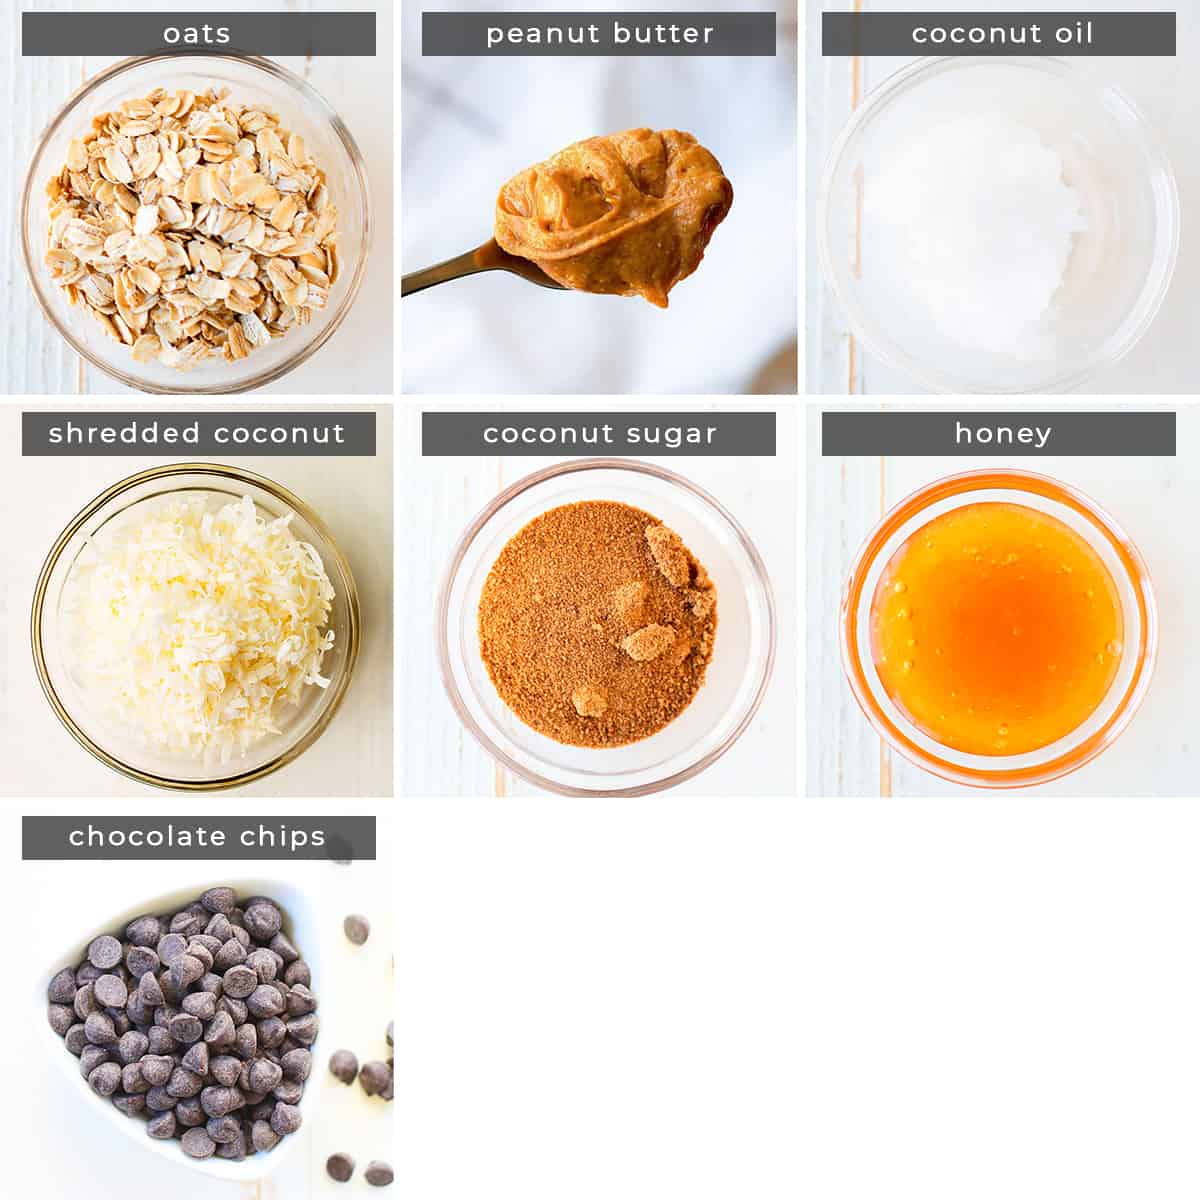 Image showing recipe ingredients oats, peanut butter, coconut oil, shredded coconut, coconut sugar, honey, and chocolate chips.